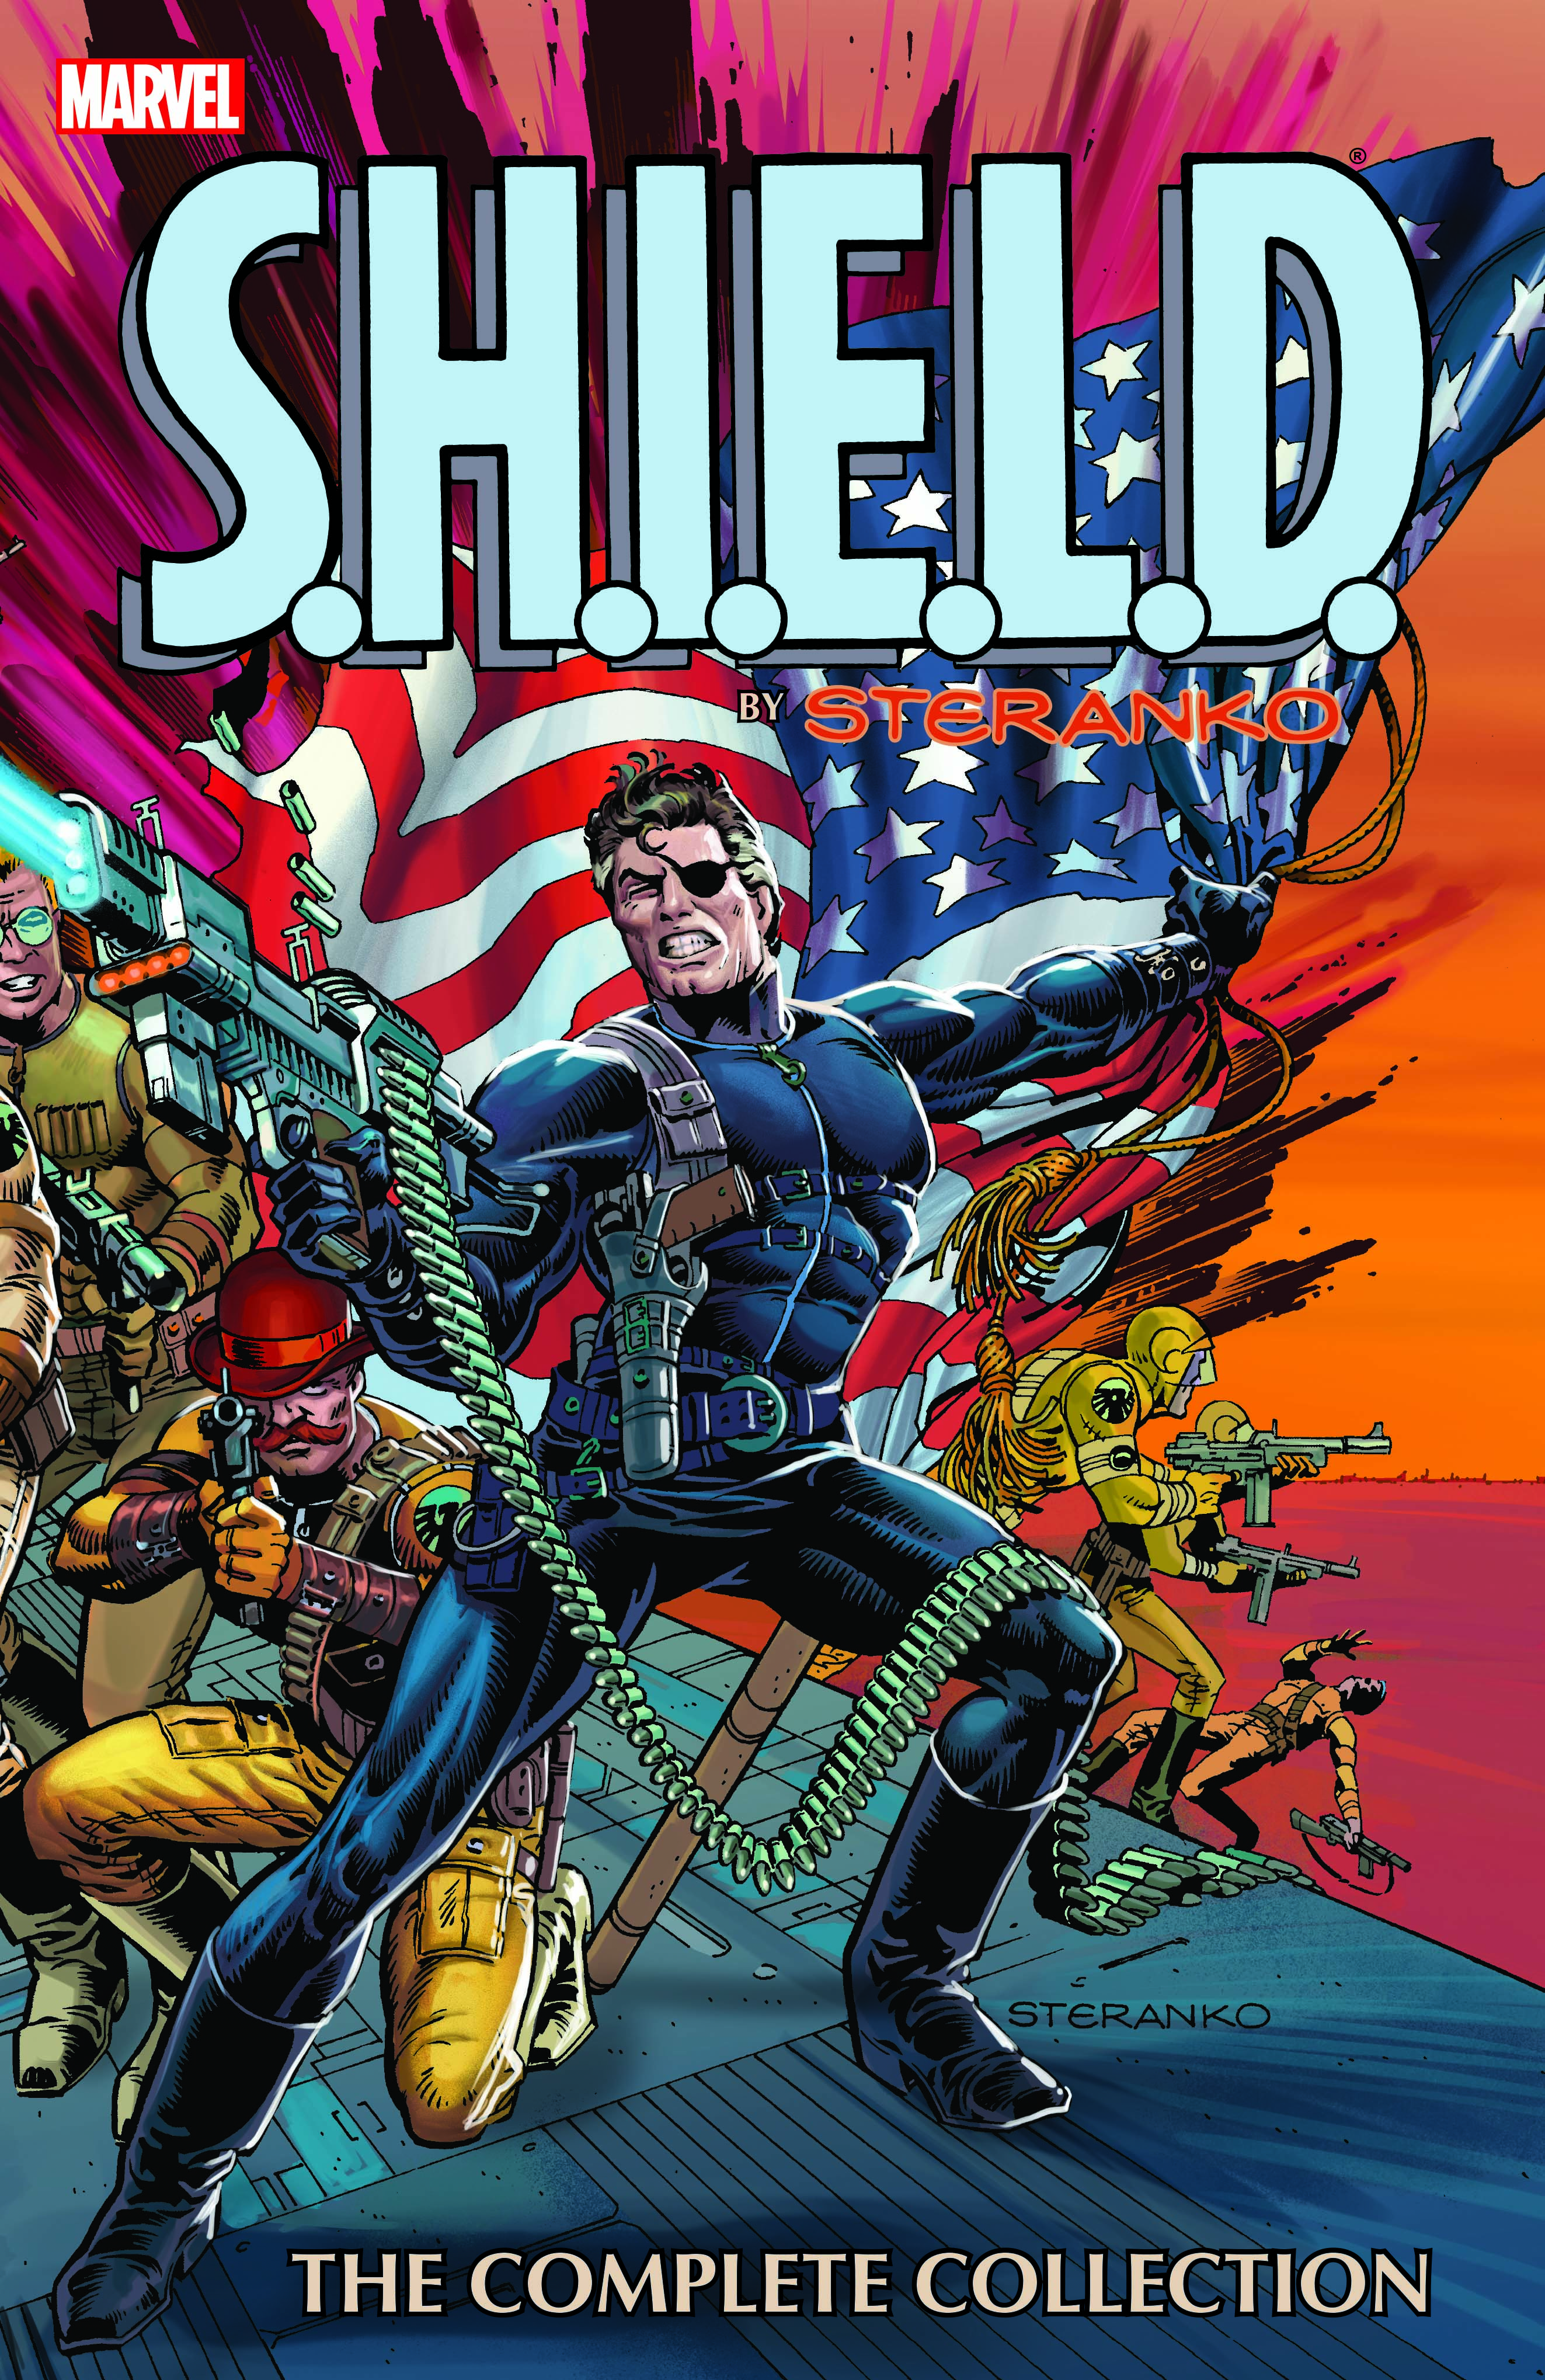 S.H.I.E.L.D. by Steranko: The Complete Collection (Trade Paperback)